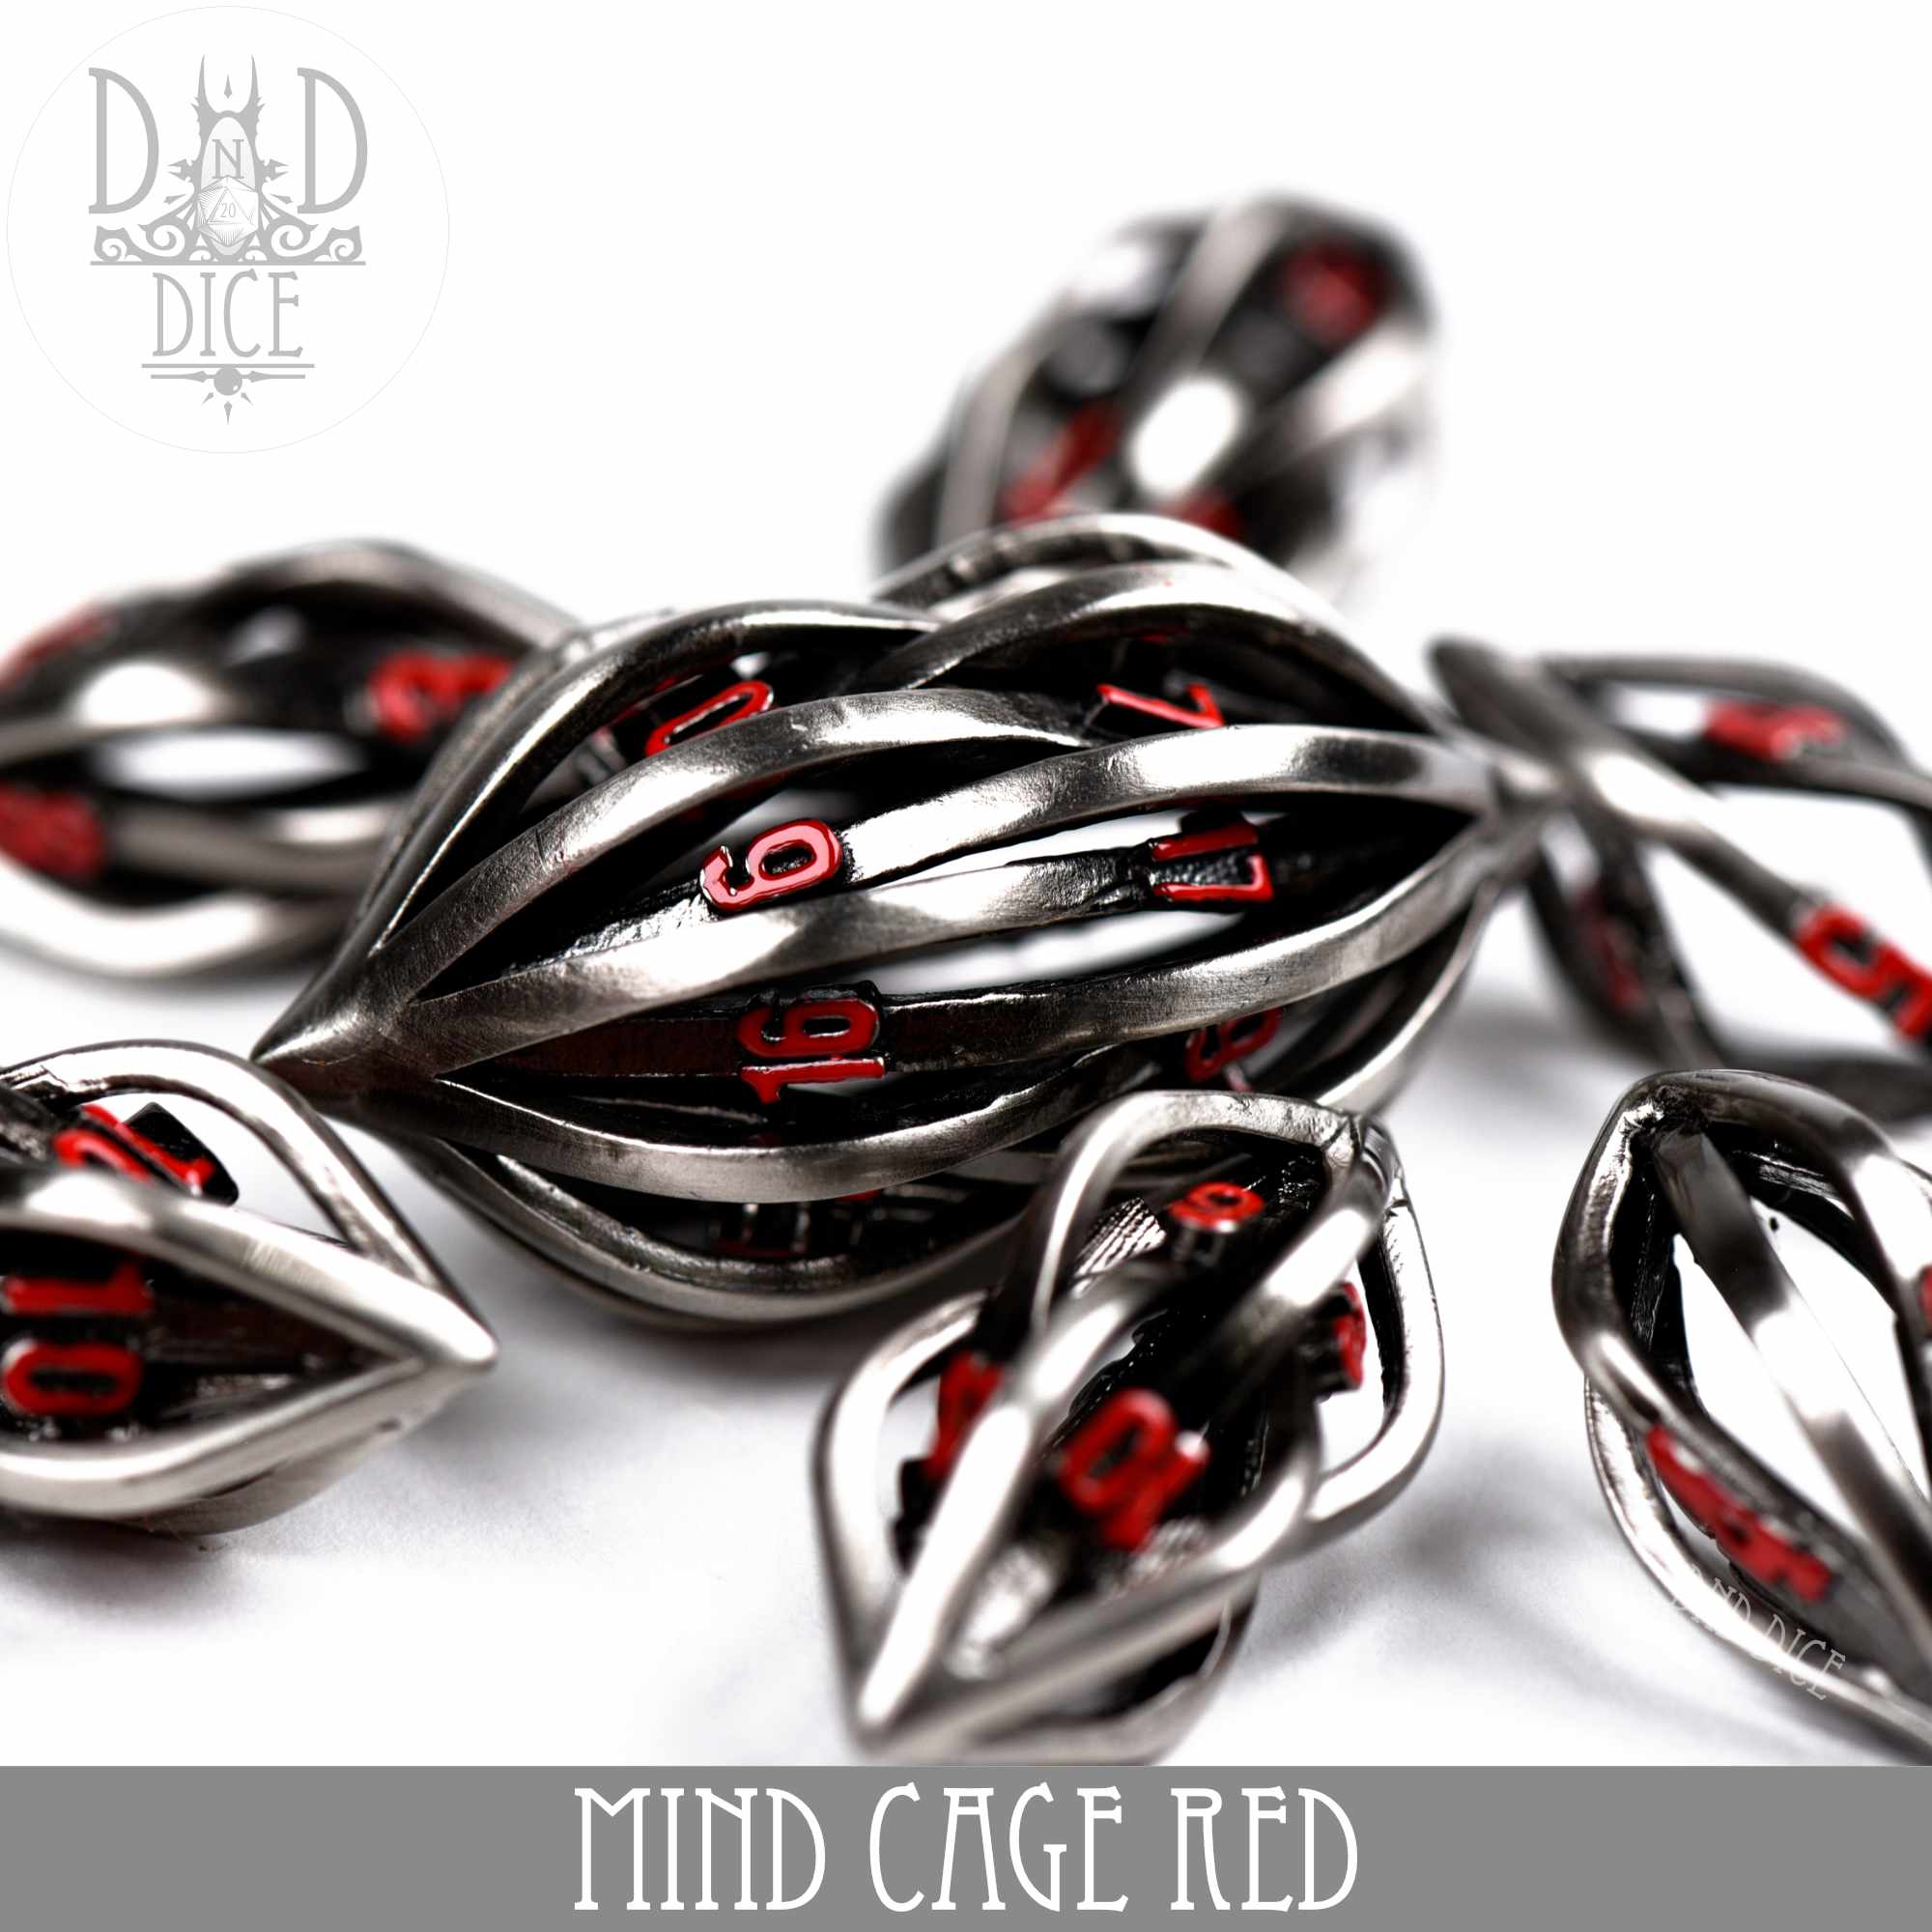 Mind Cage Red - Metal (Gift Box)